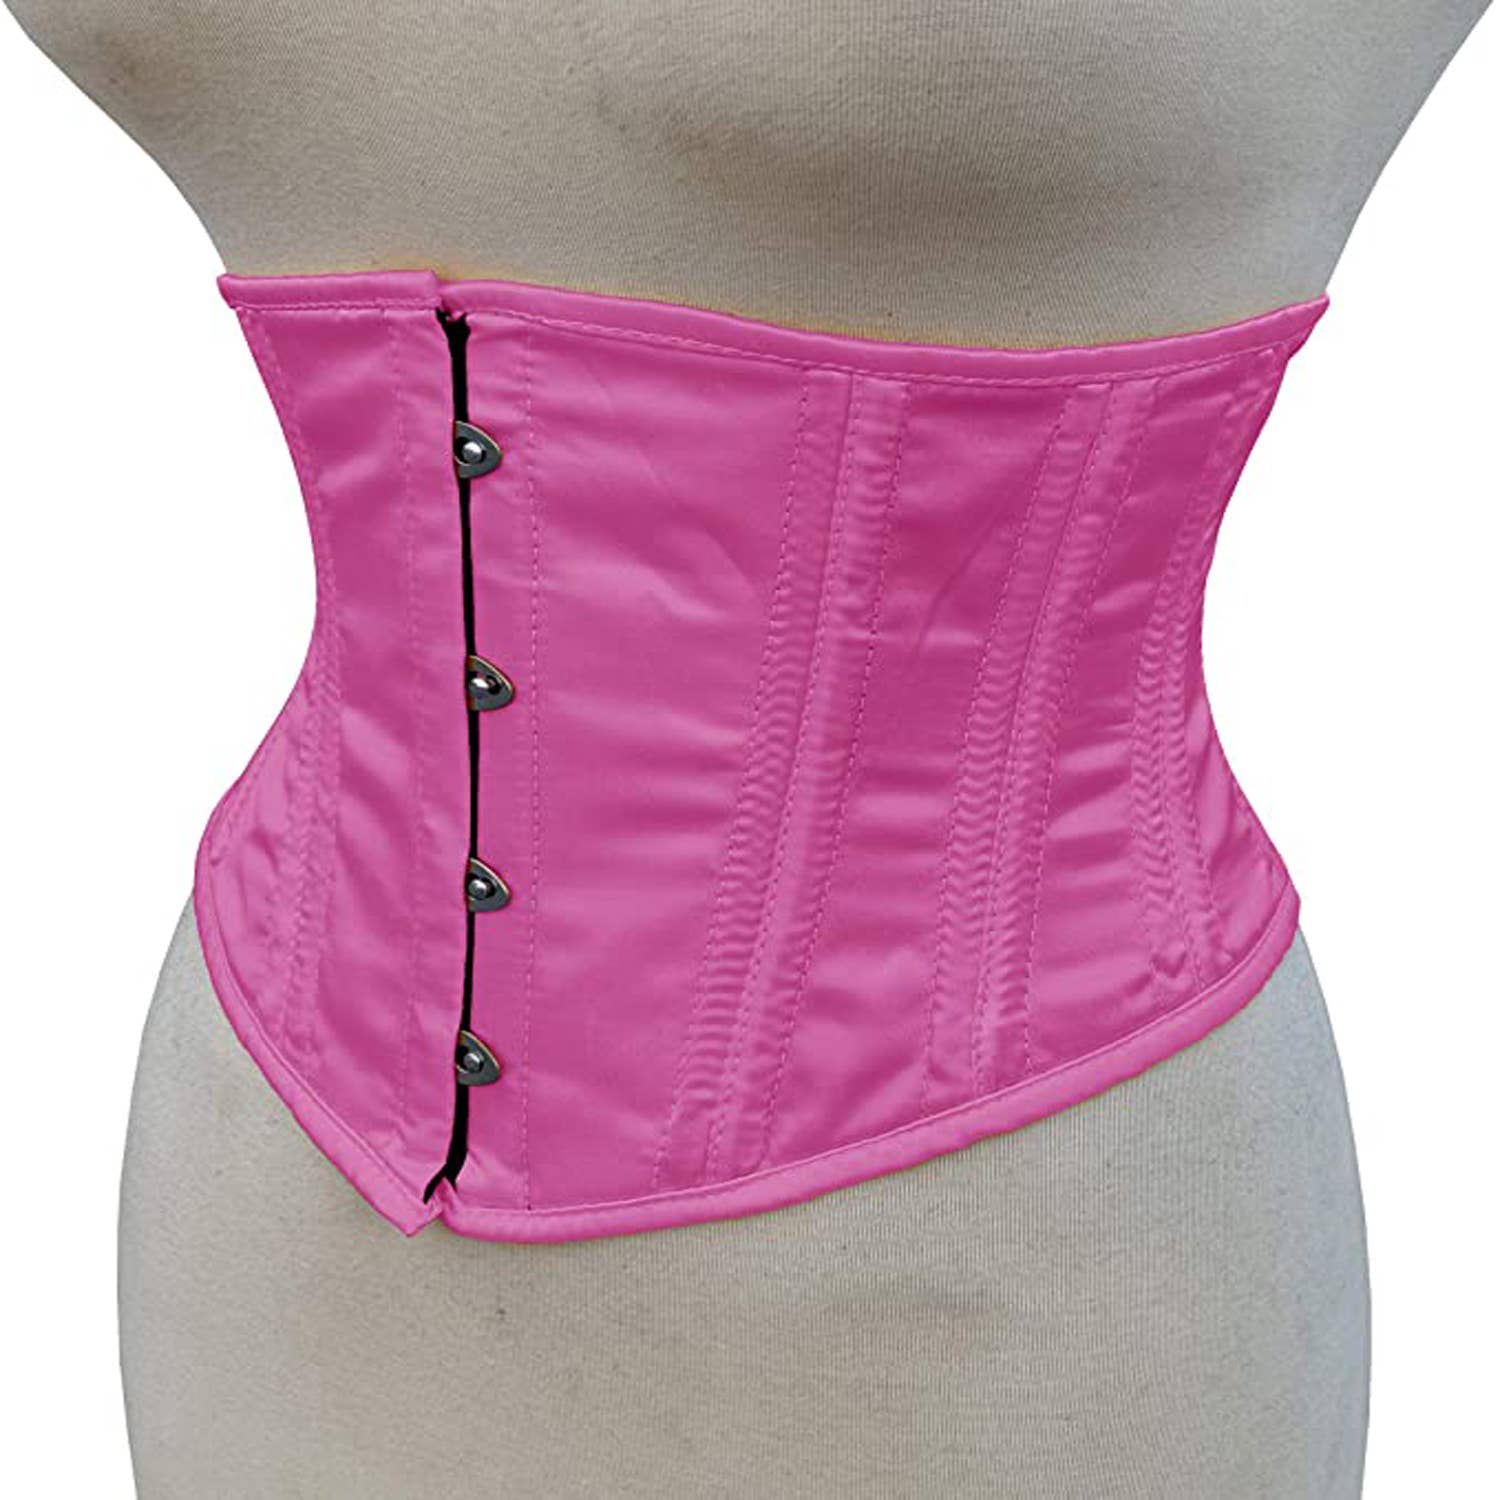 Wholesale Post-Surgical Girdle W/2 Hooks & Zippered Crotch for your store -  Faire